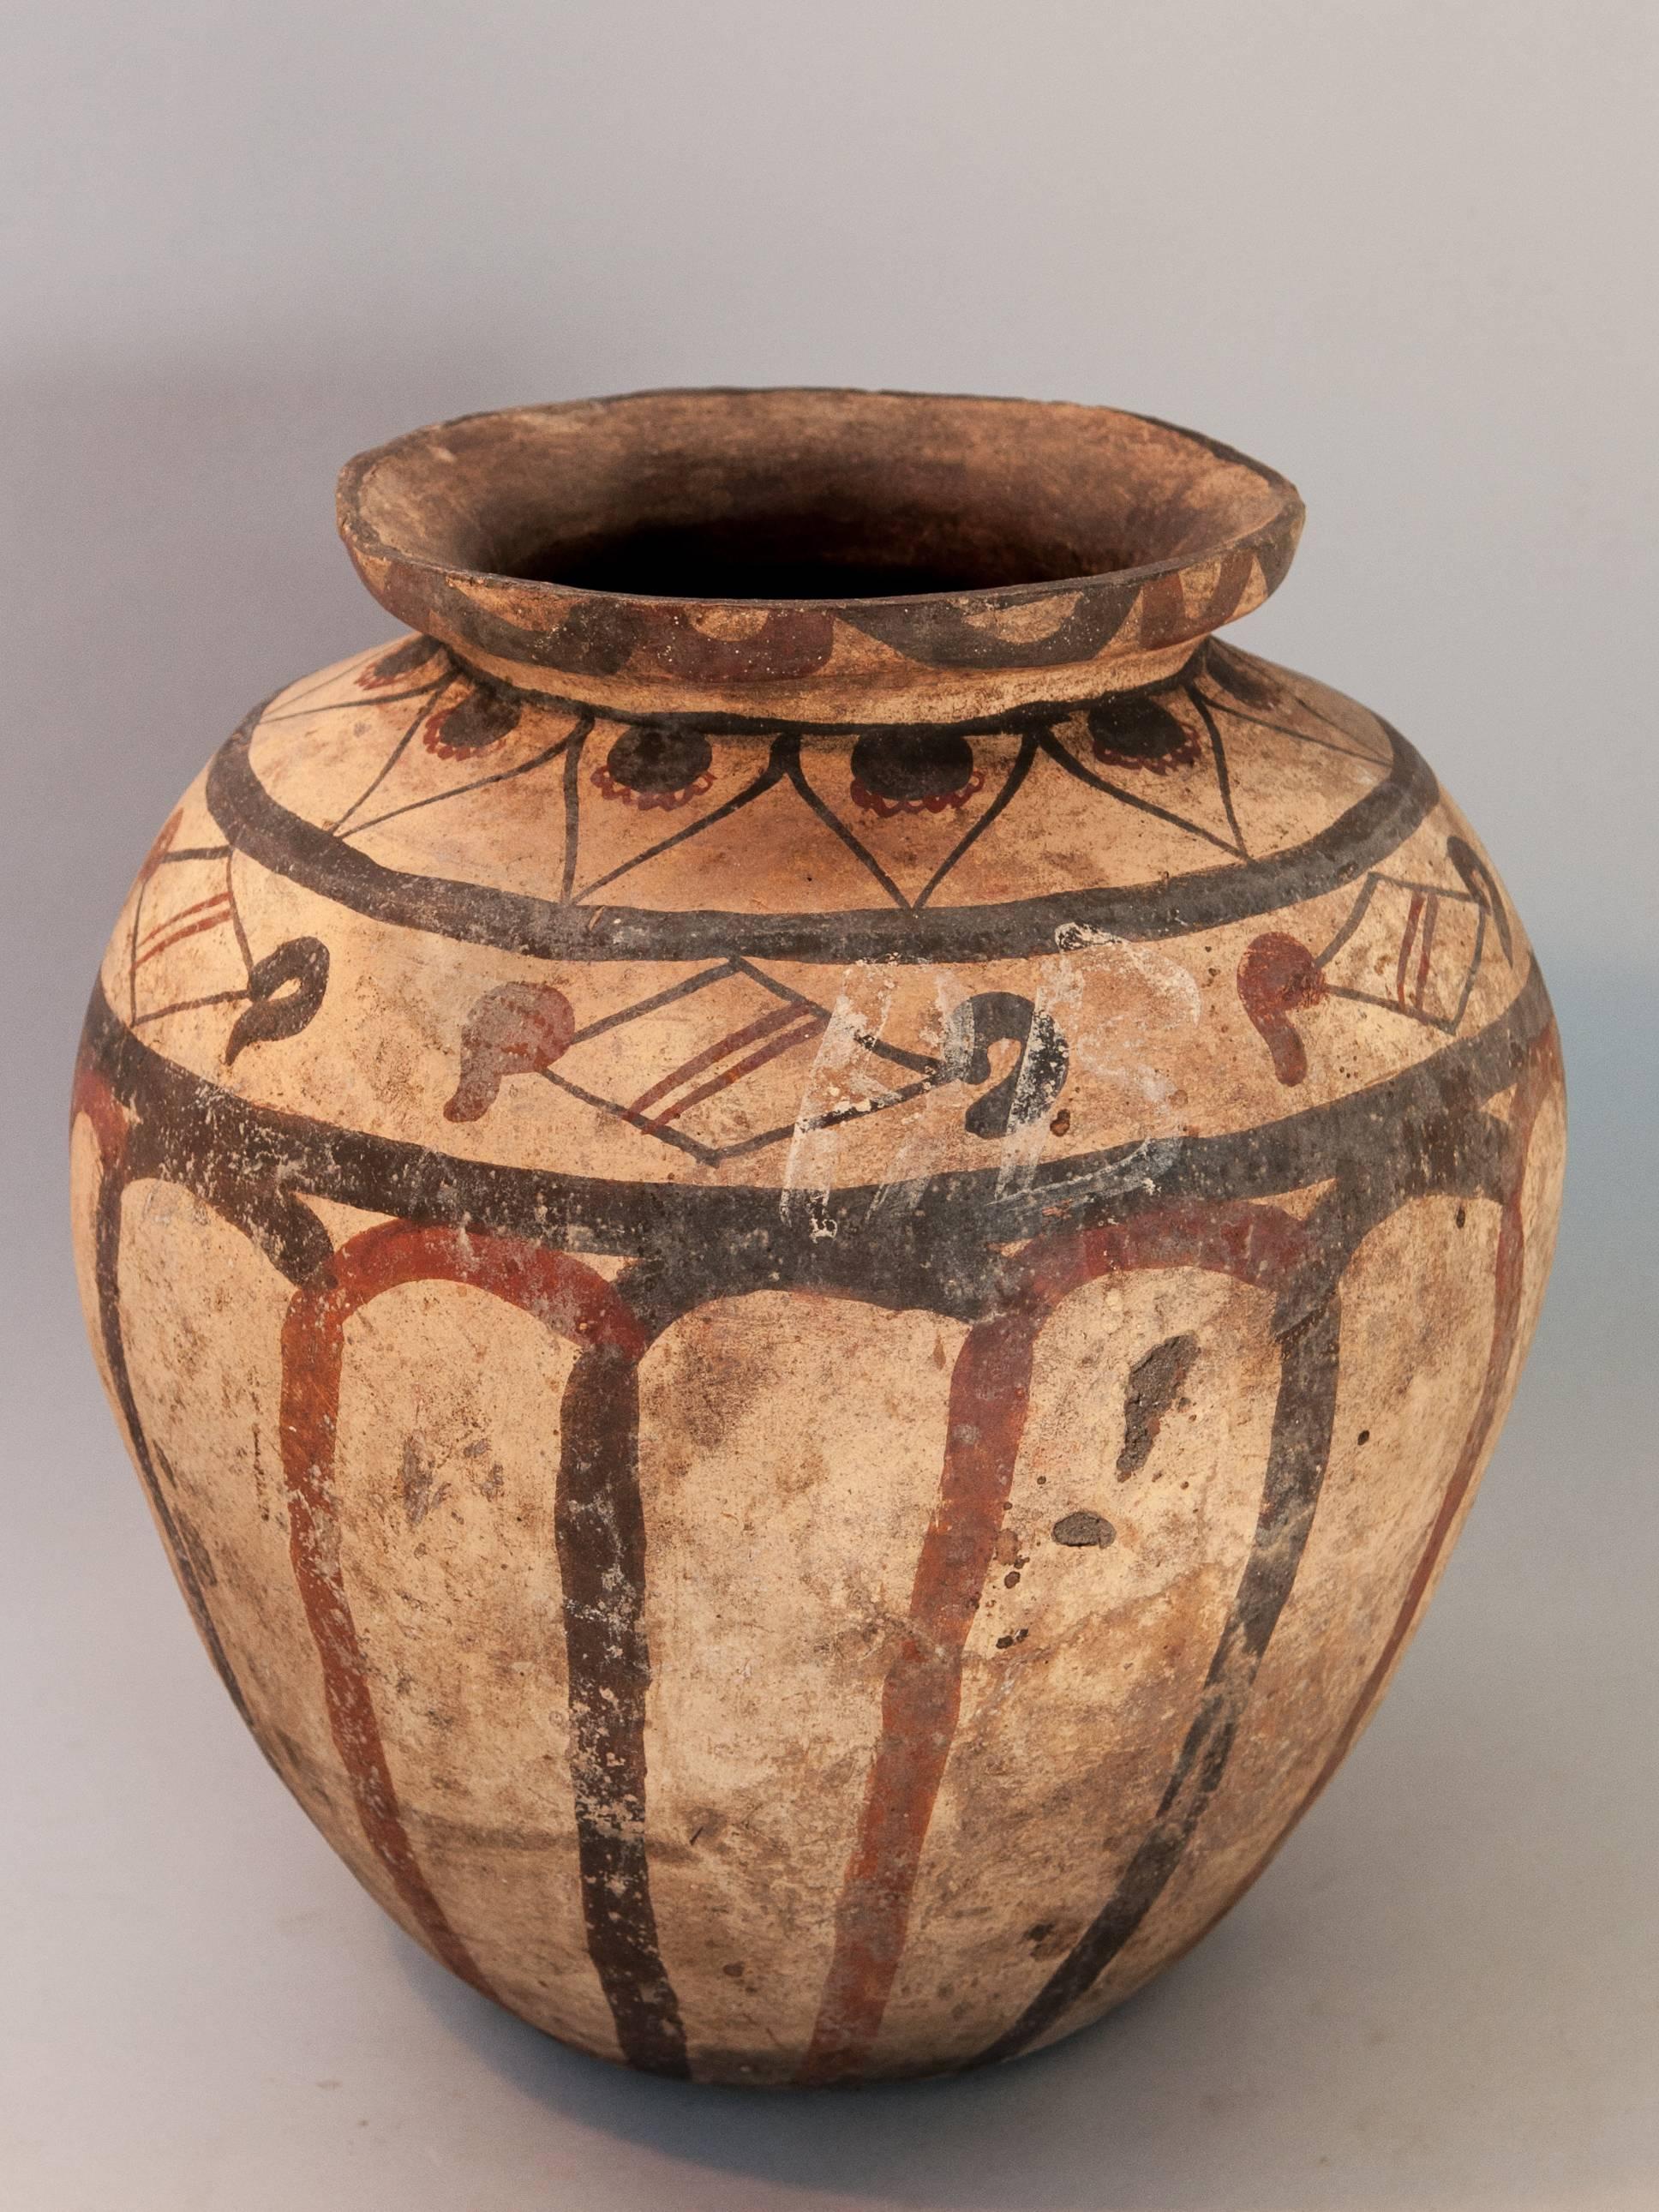 Earthenware Pot with Painted Design Mid-20th Century. Molucca Islands, Indonesia
This low fired earthenware pot is from the Southeast Molucca Islands, most probably from Kei. It is formed by hand, not thrown, using the fist and palm to achieve its